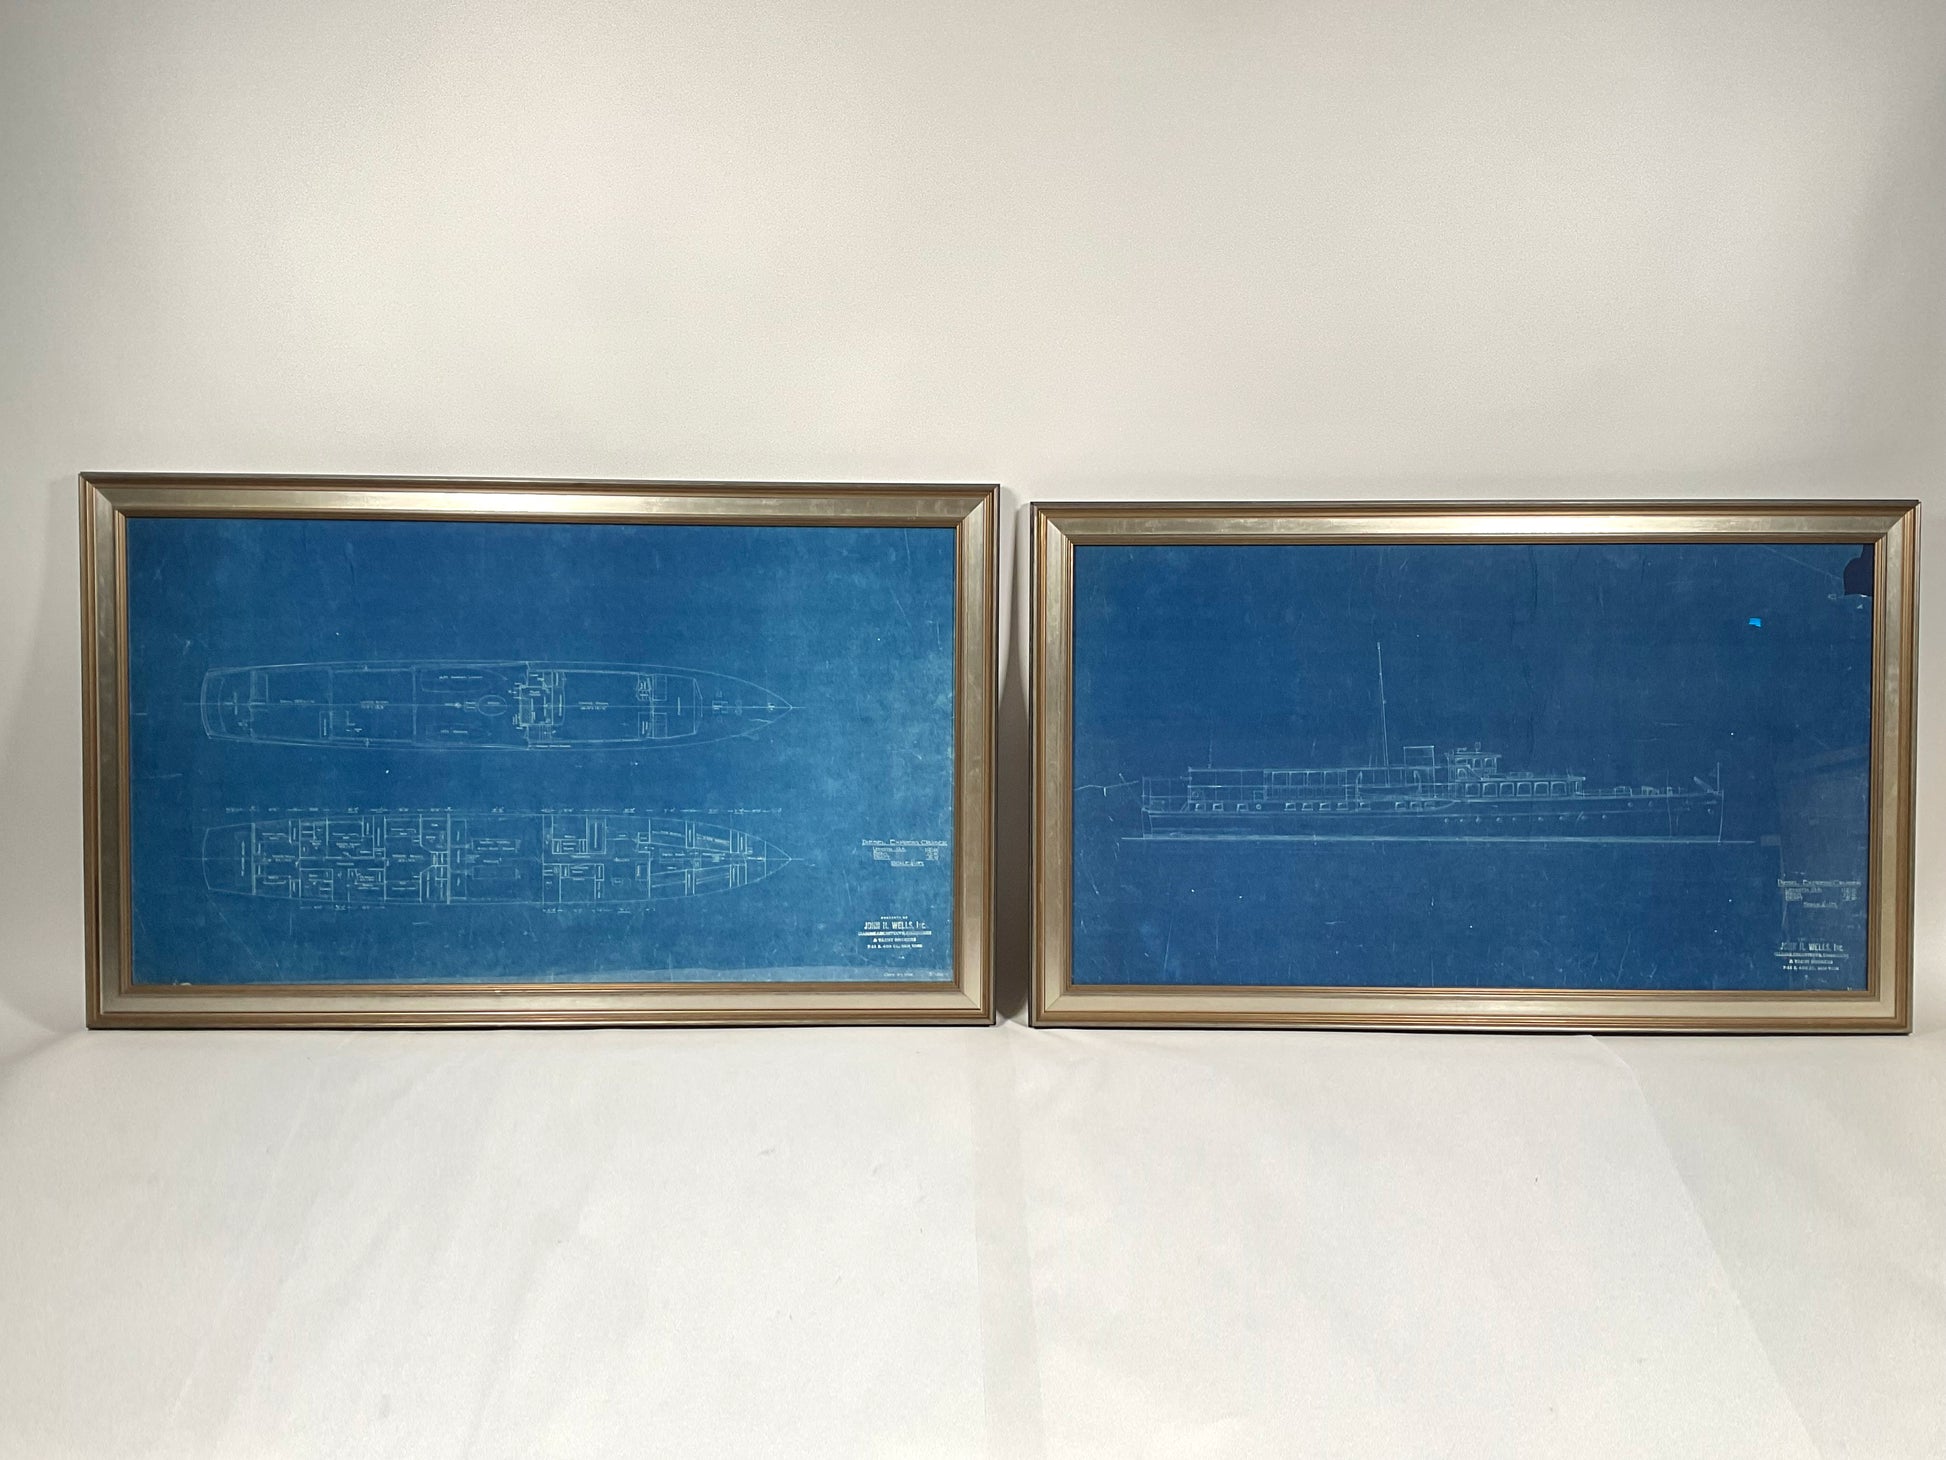 Rare pair of the Consolidated Yacht ACANIA - Lannan Gallery